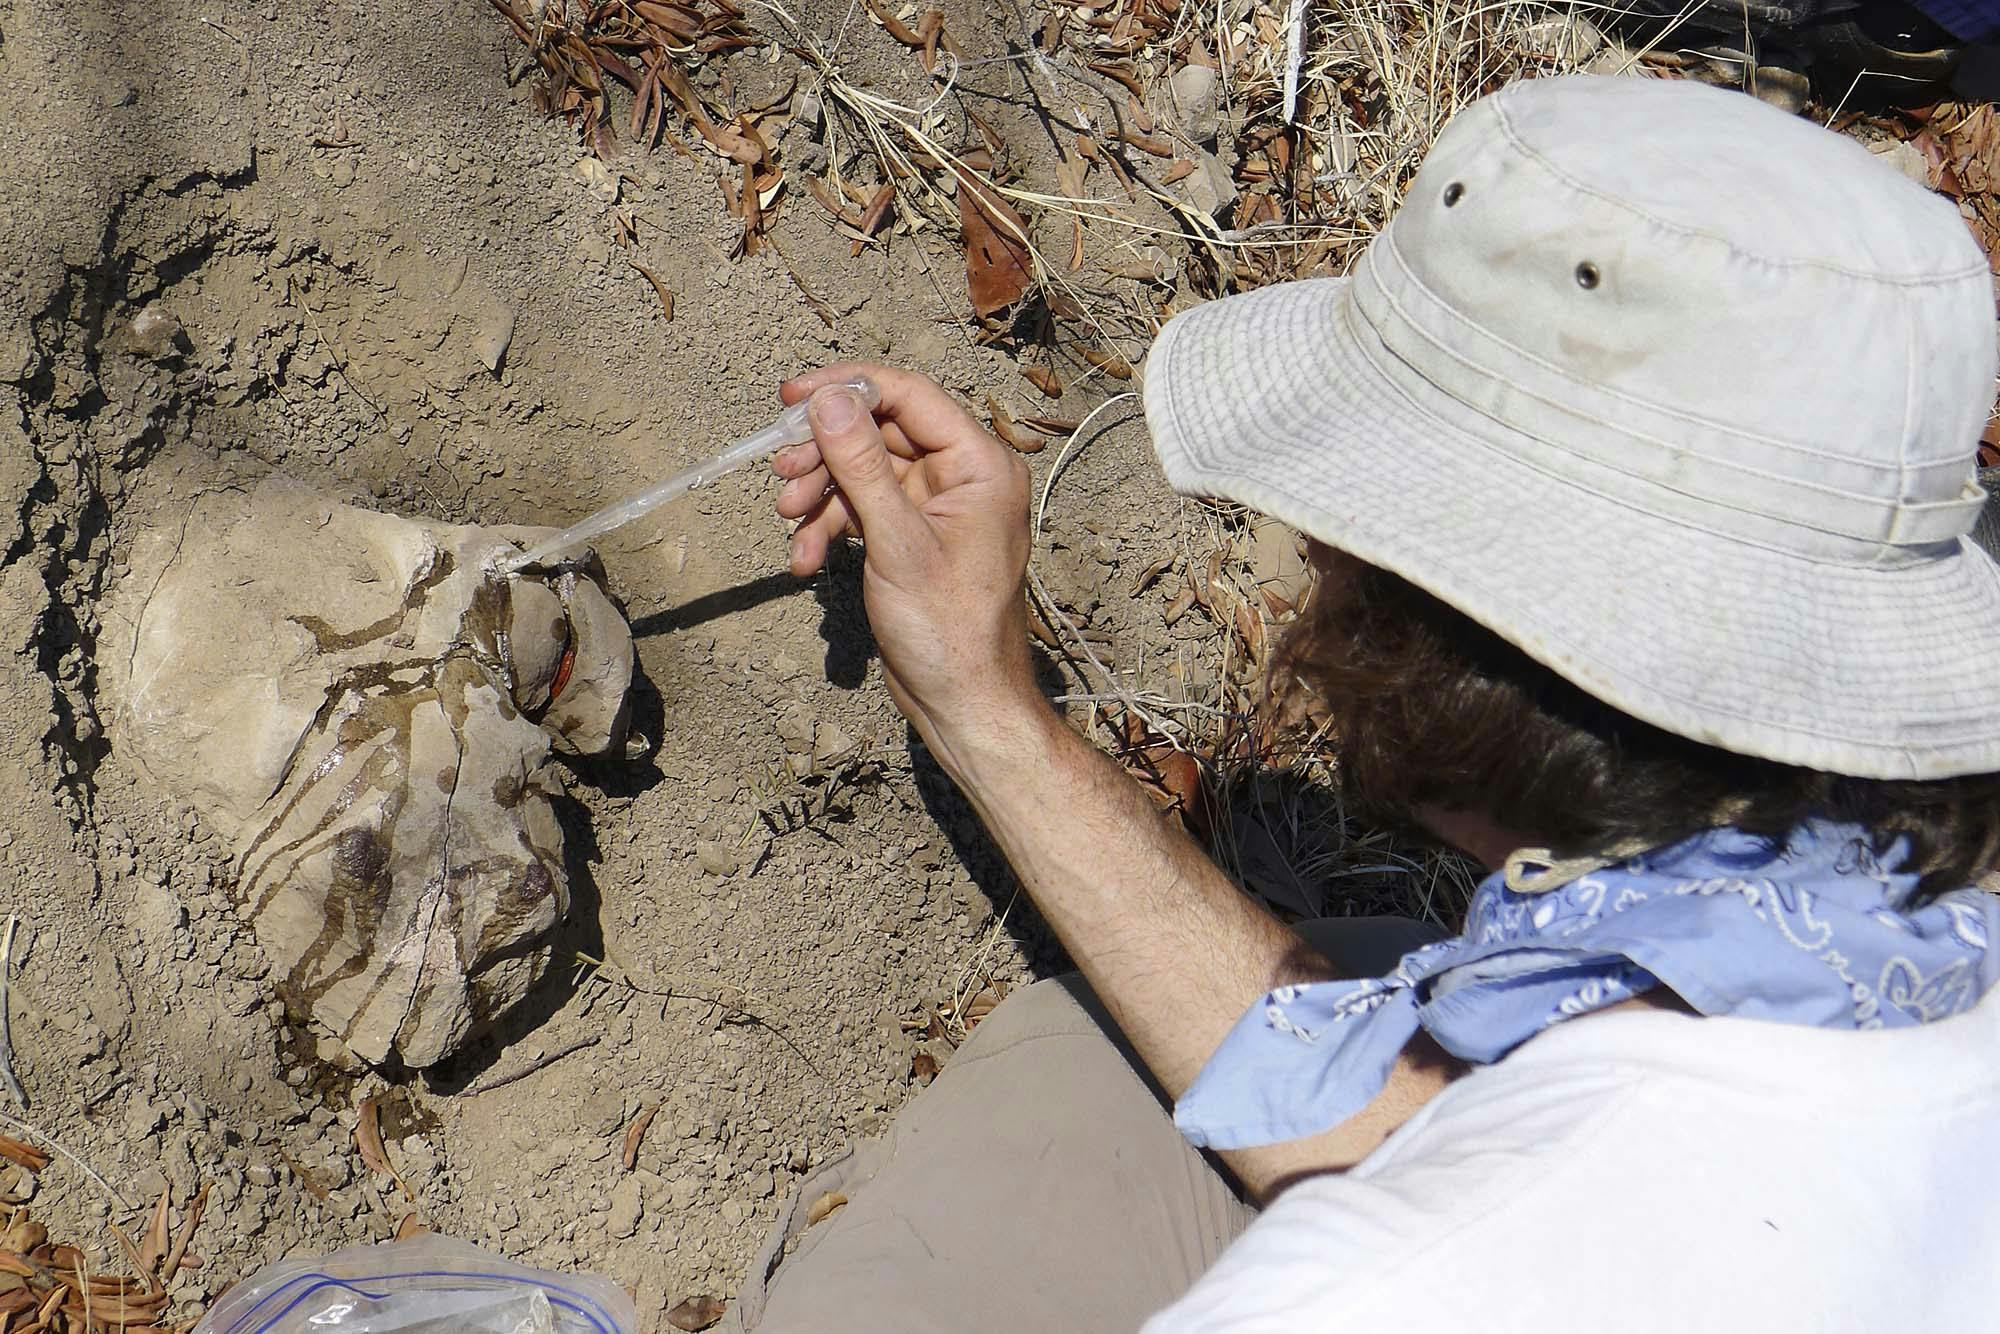 Looking down on a man holding a pipette and applying a liquid to a fossil dicynodont skull that is still partially buried in the ground.